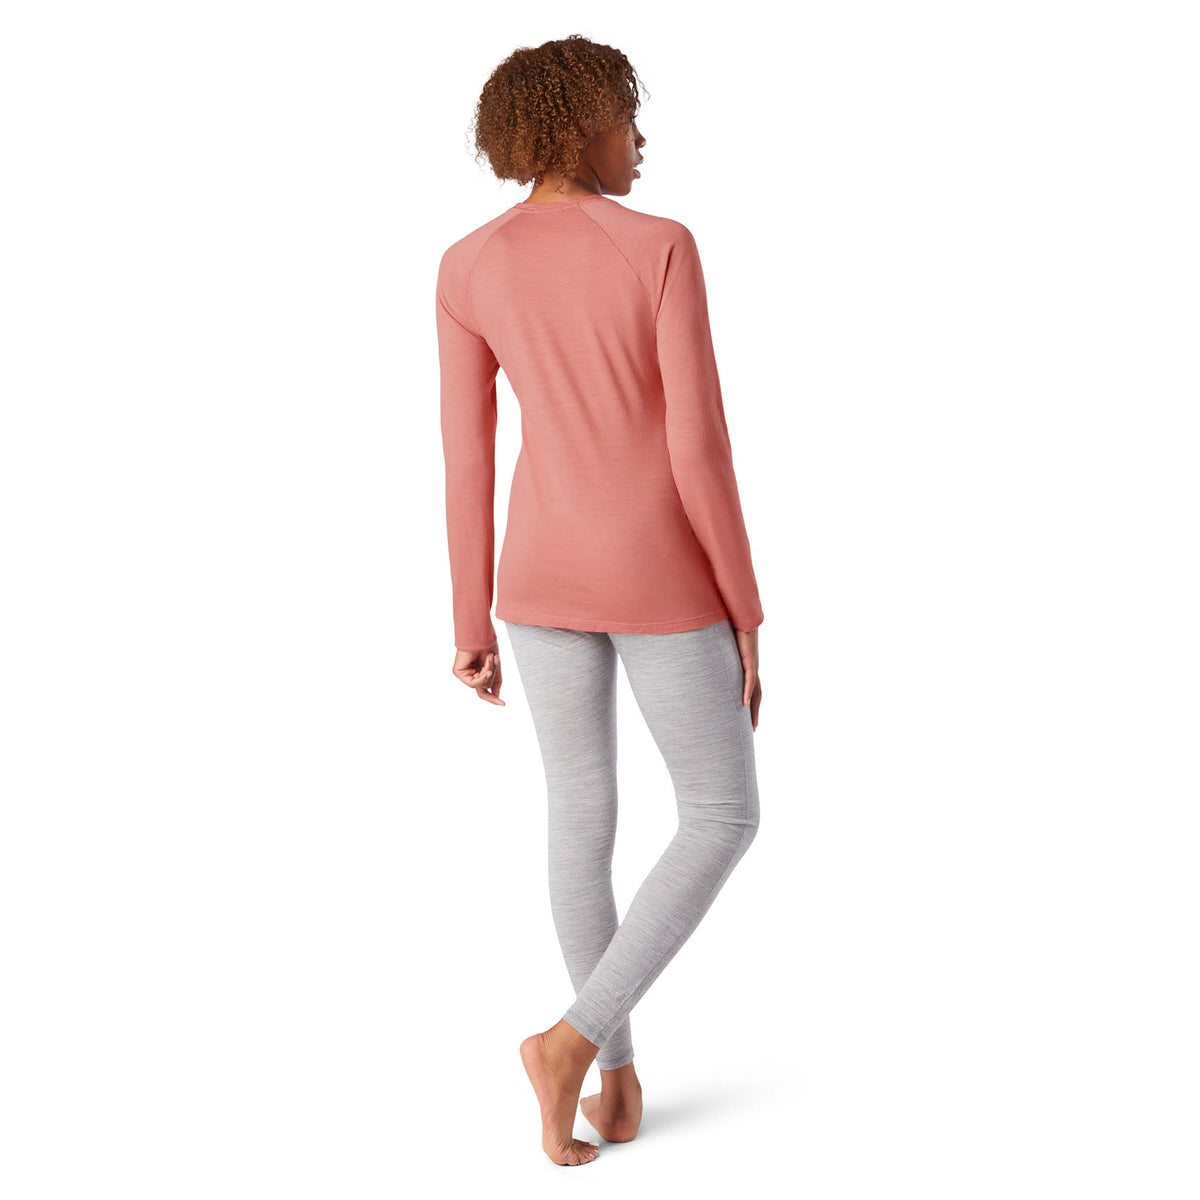 Smartwool Merino 150 Baselayer chandail à manches longues rose femme dos